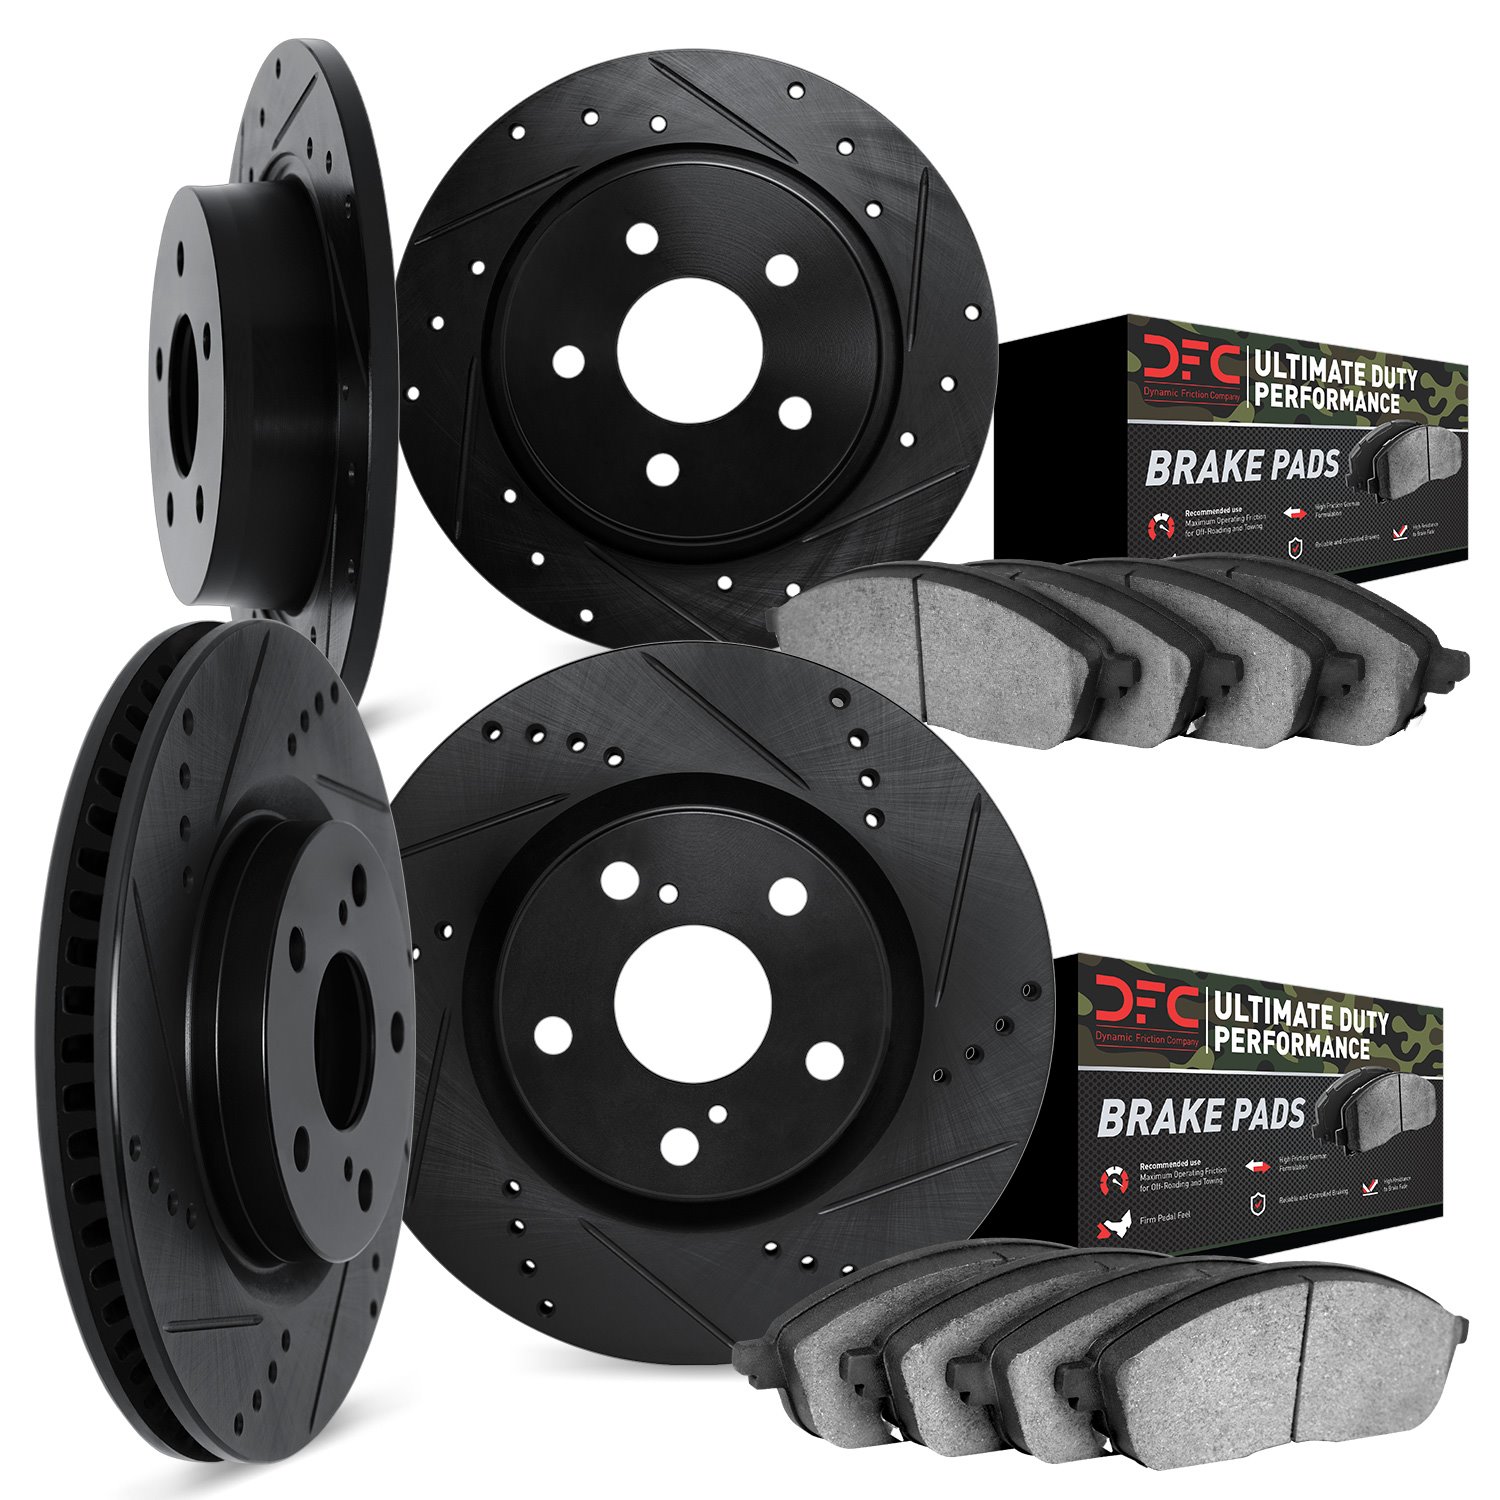 8404-42007 Drilled/Slotted Brake Rotors with Ultimate-Duty Brake Pads Kit [Black], Fits Select Mopar, Position: Front and Rear